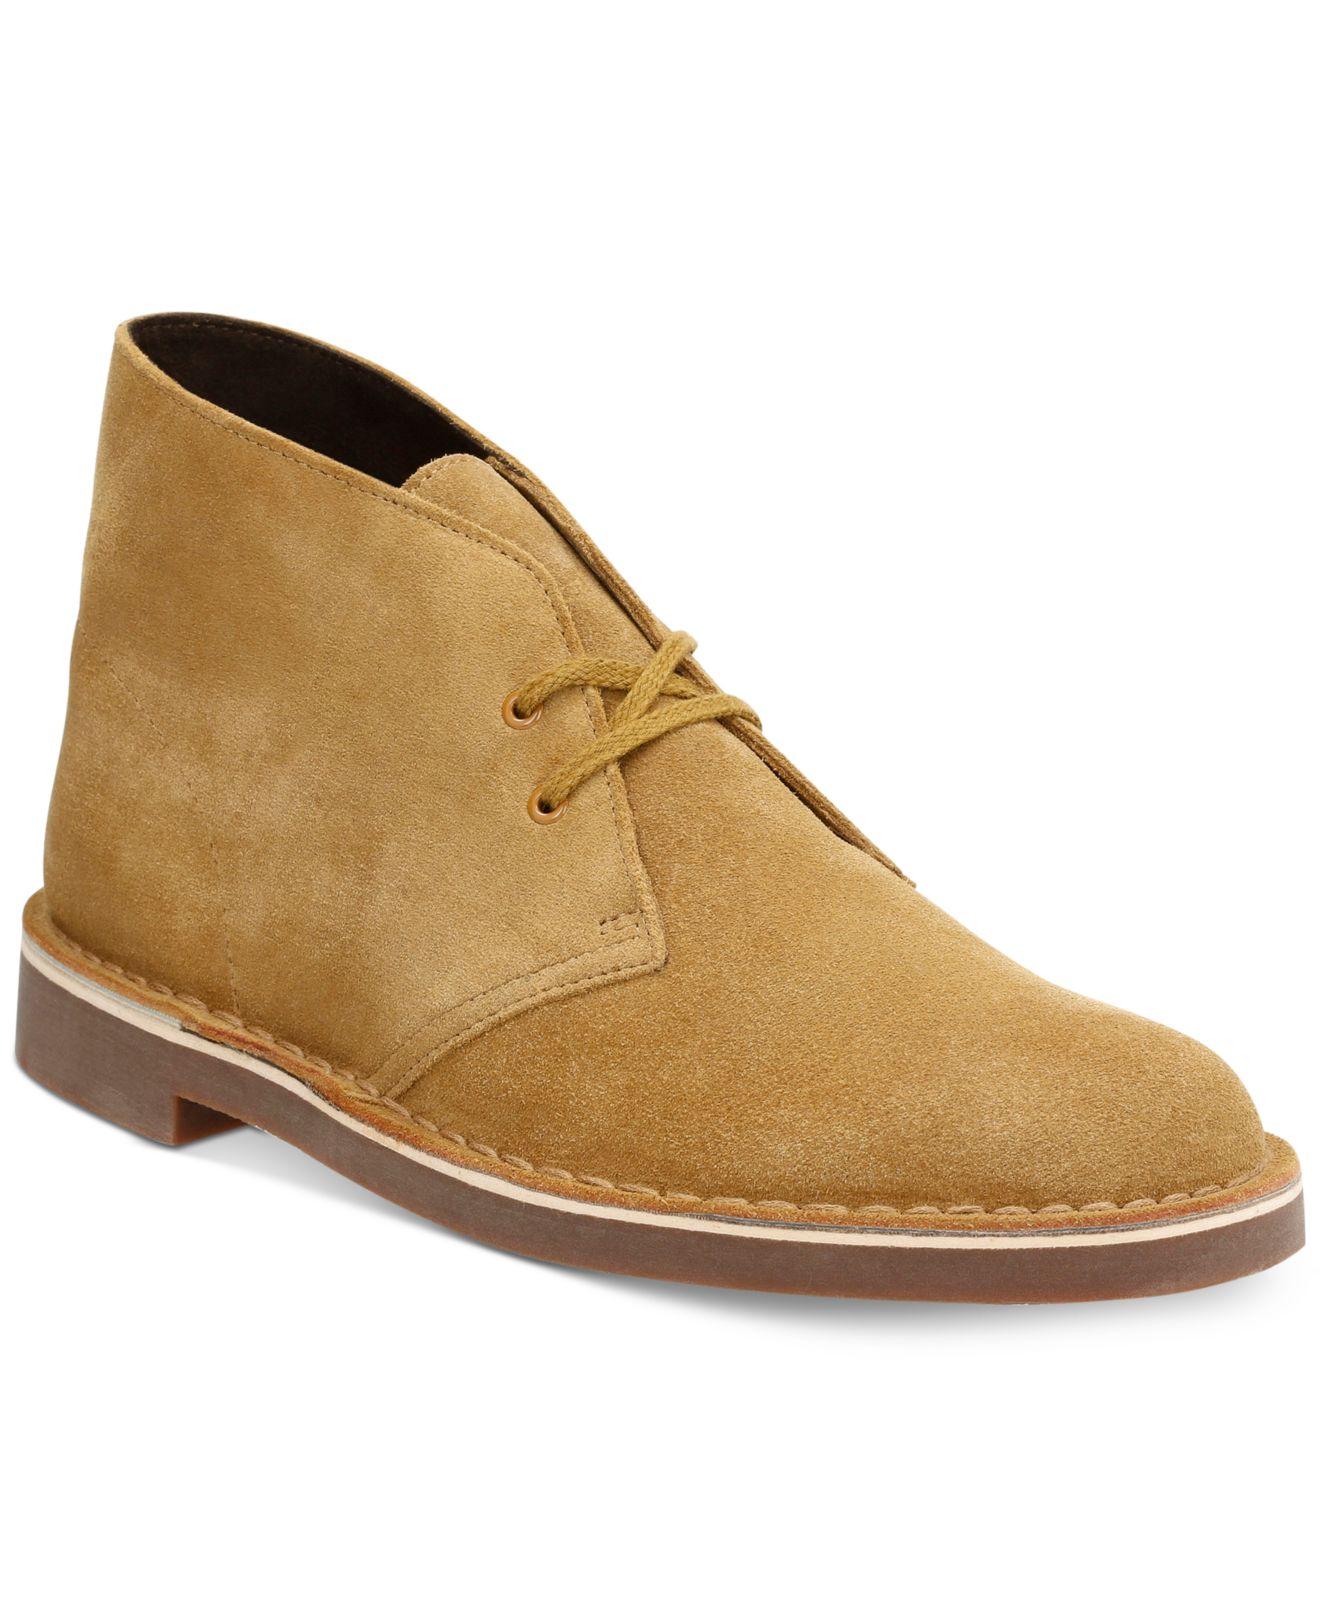 Clarks Suede Bushacre 2 Chukka Boot for 